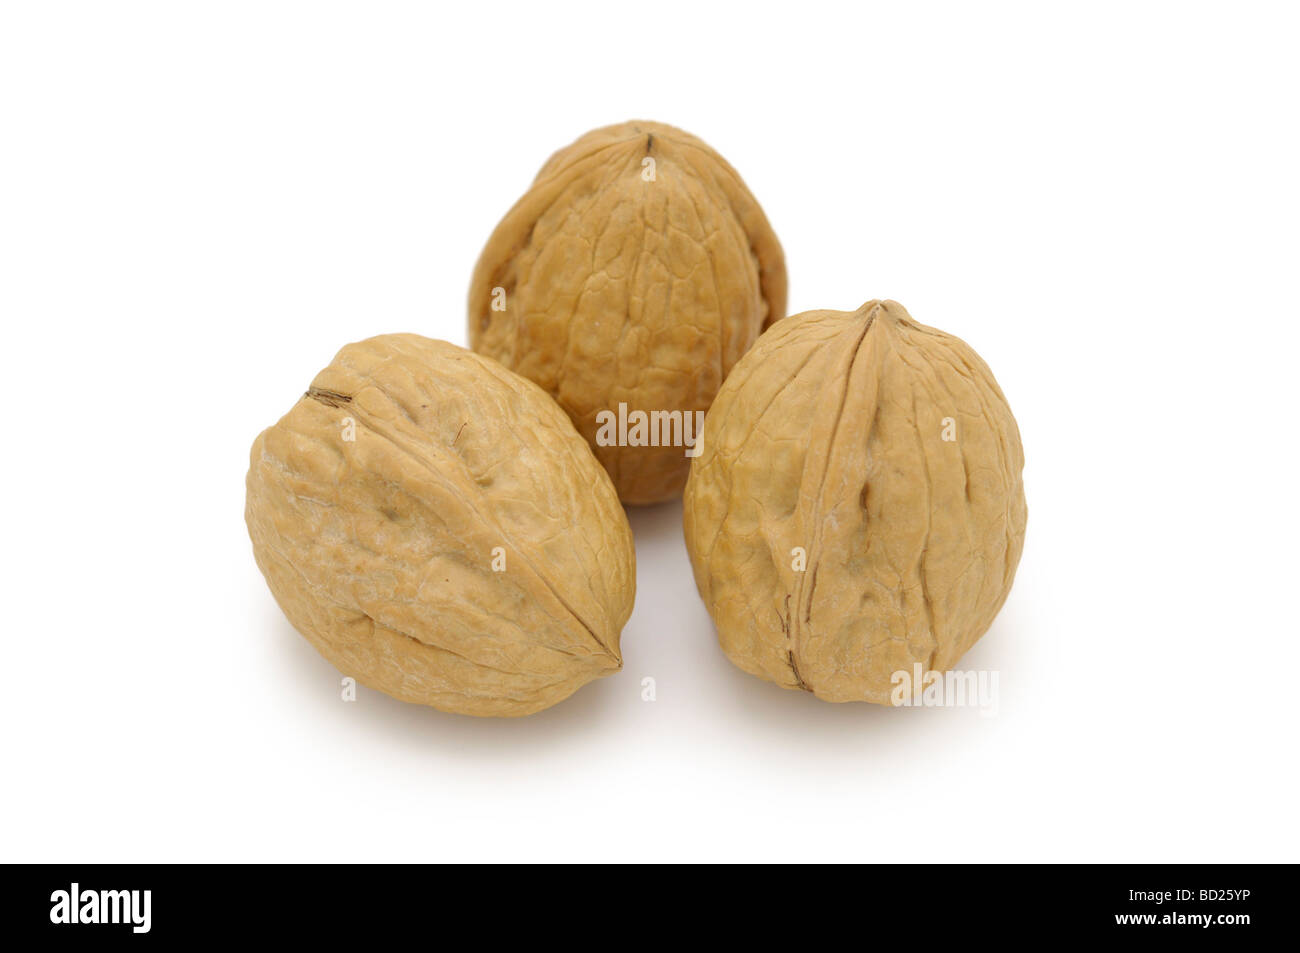 Walnuts Whole in Shell Stock Photo